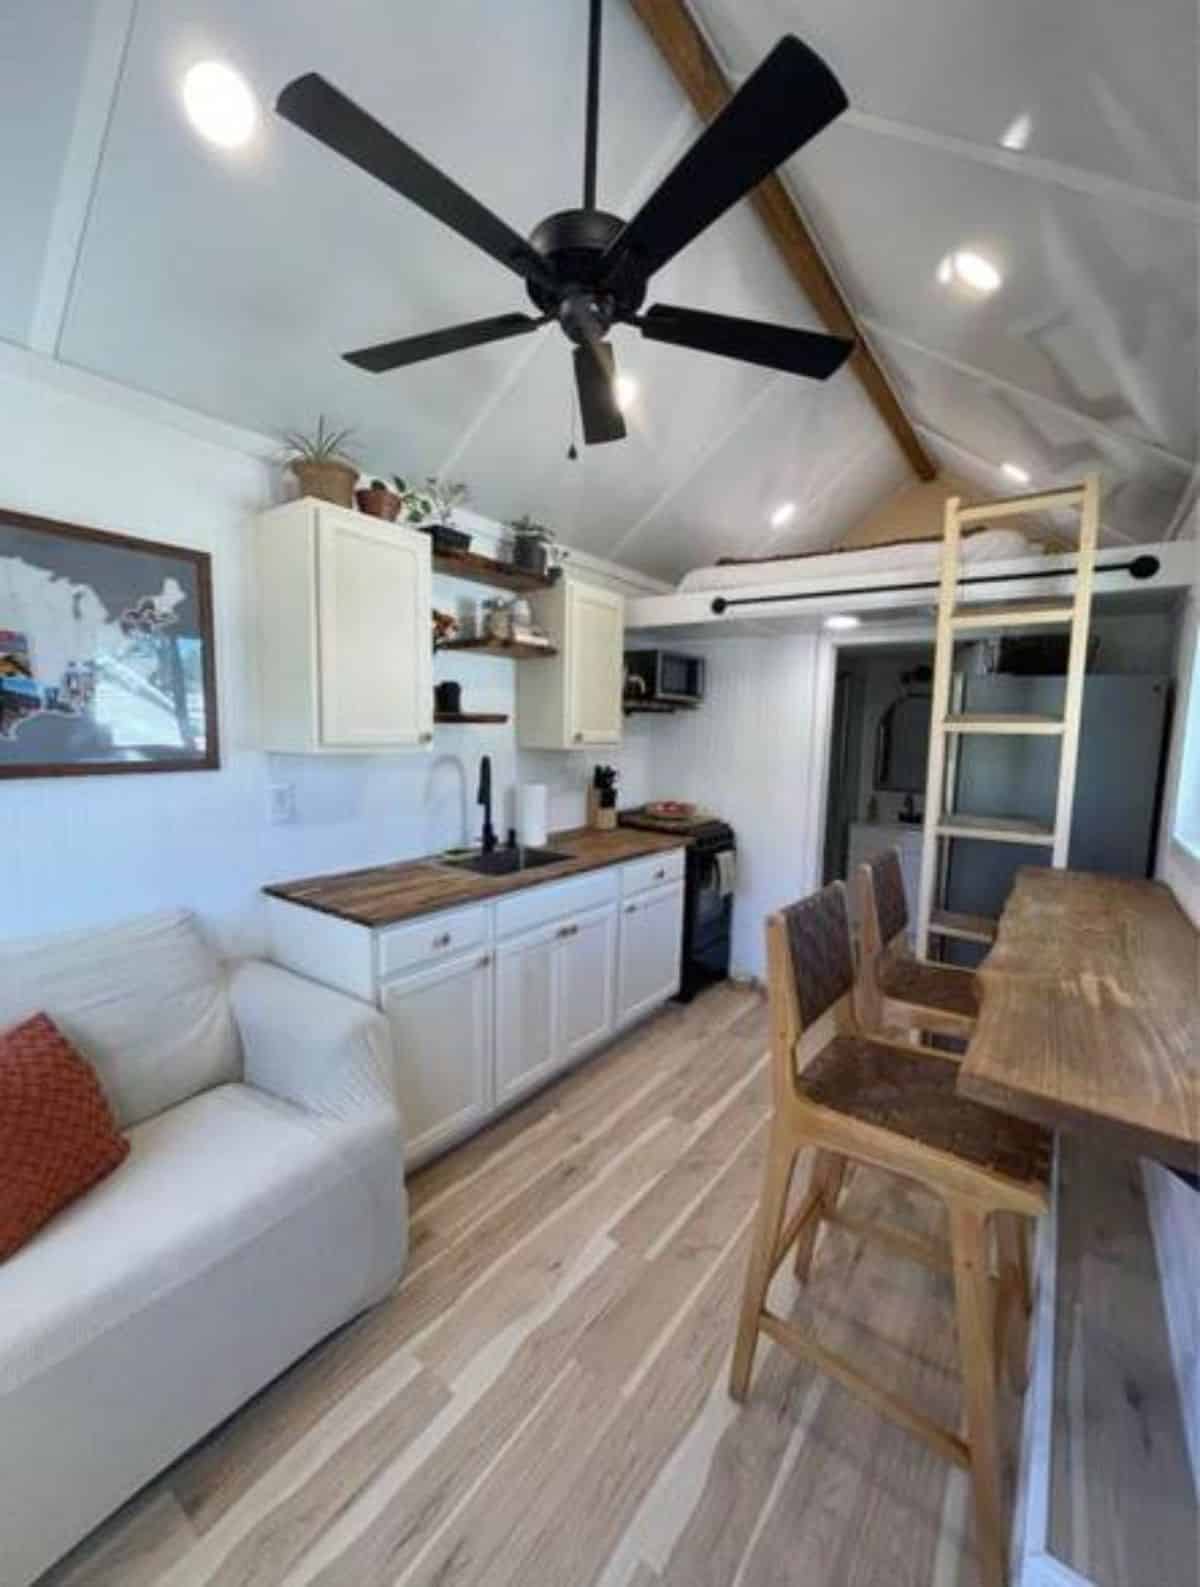 living area of 16' chic tiny home has a couch and dining table with chairs on the opposite side